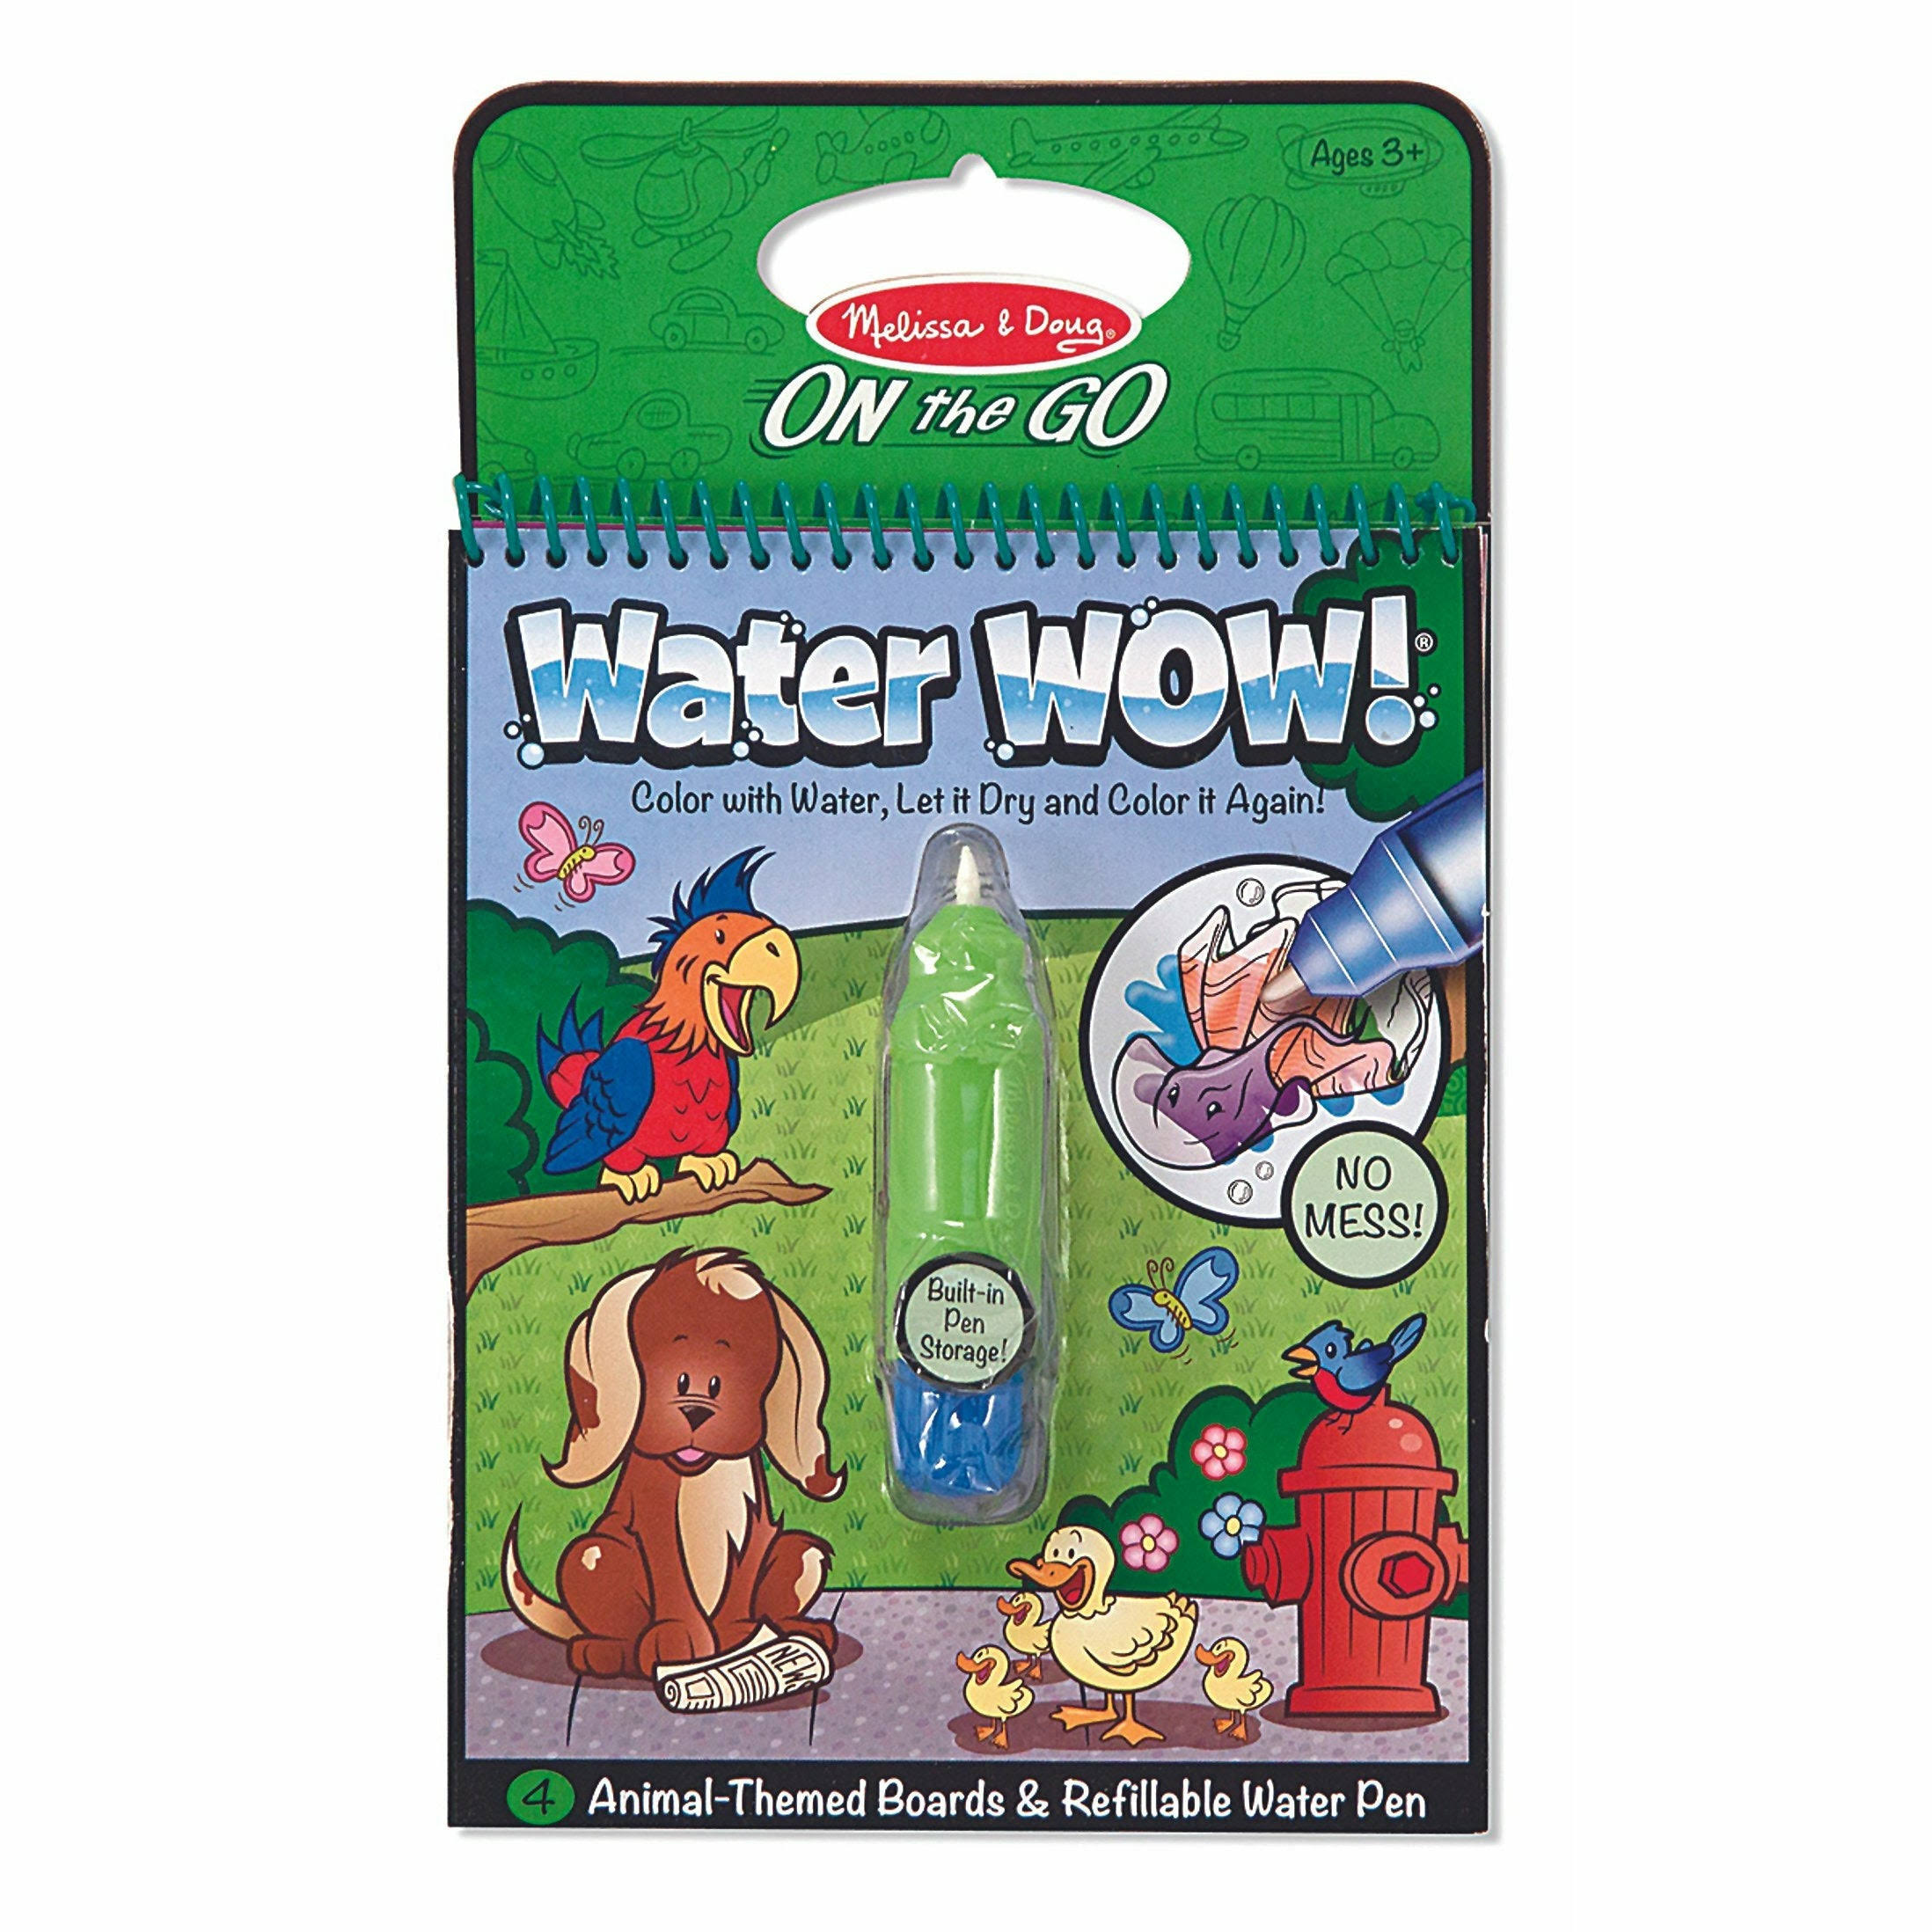 Melissa & Doug On The Go Water Wow Colouring Book - Animals